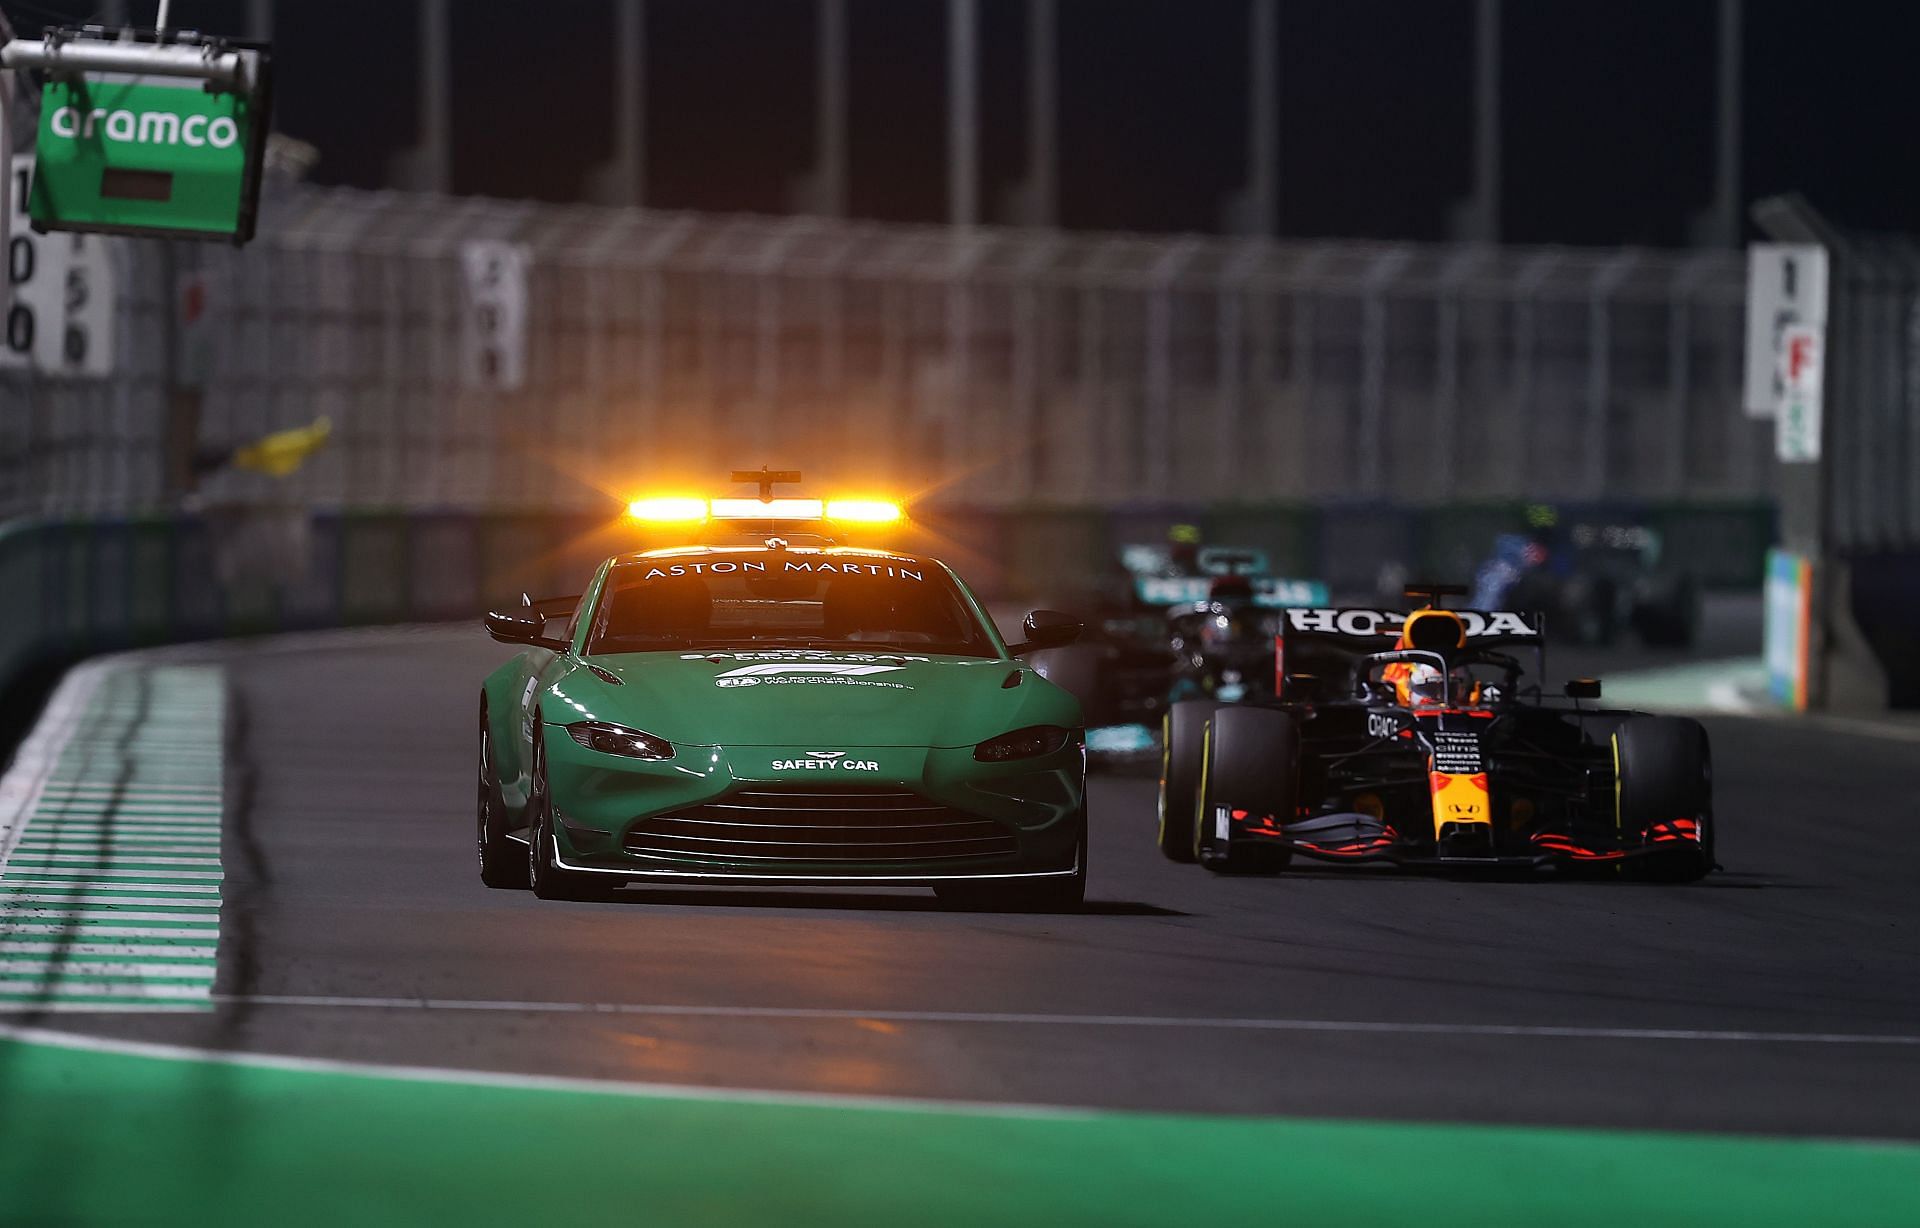 Max Verstappen wants the Aston Martin safety car to be much quicker during the SC period